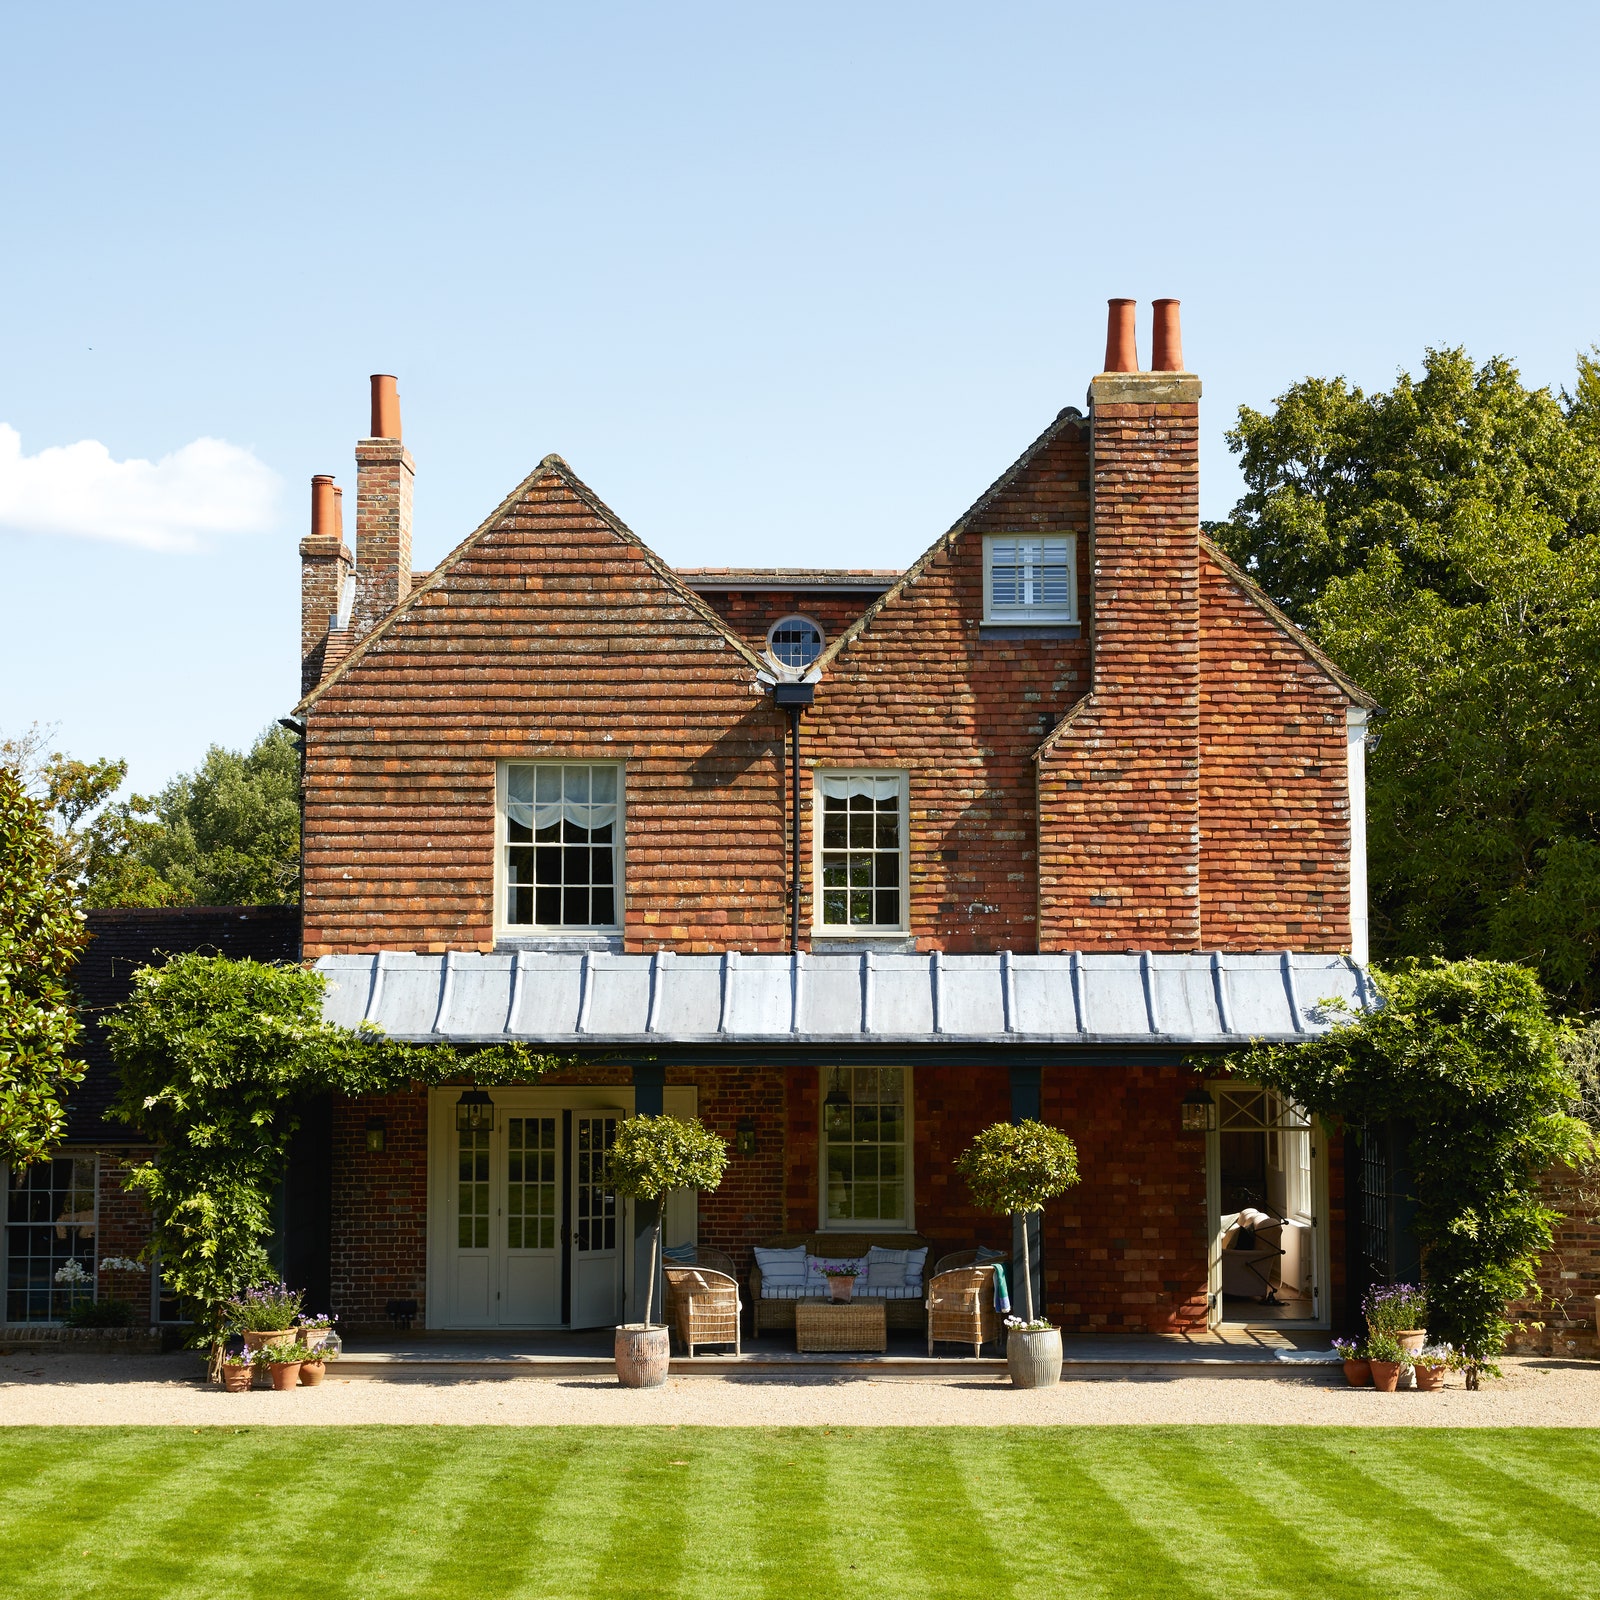 An historic rectory in Sussex that deftly brings together the old and the new